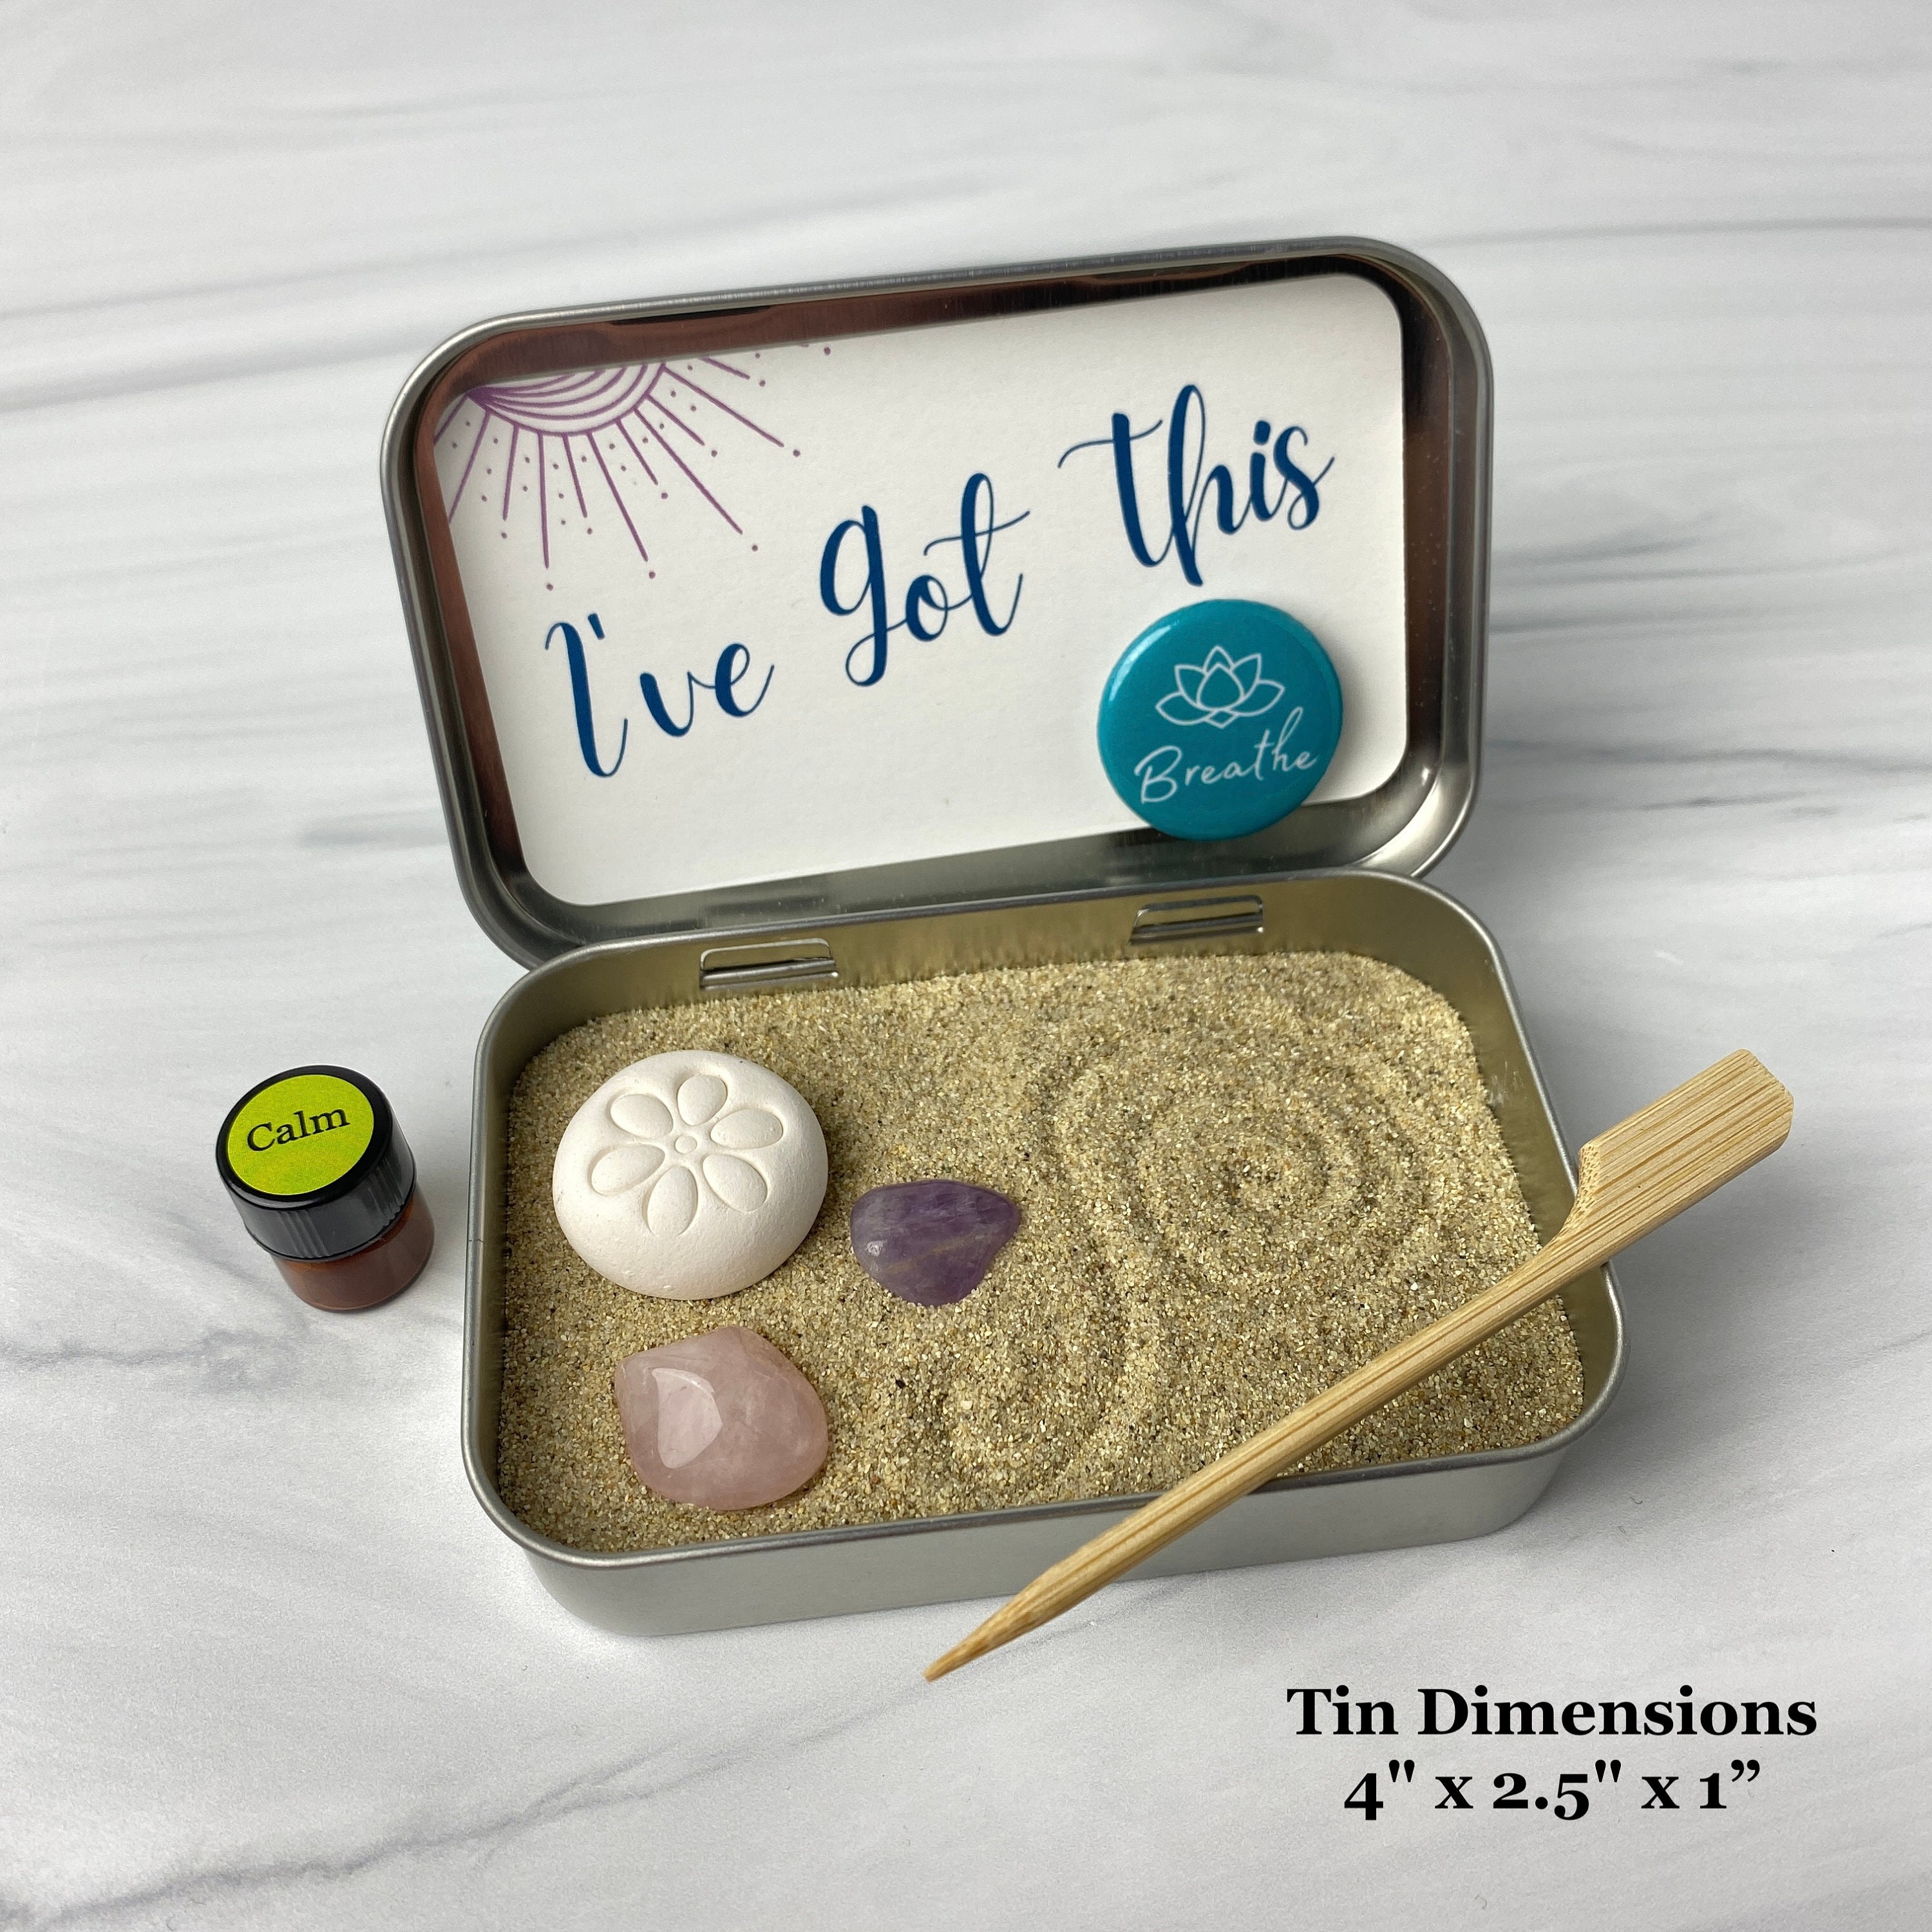 A Moment of Zen Miniature Aromatherapy Zen Garden Kit the Perfect Desk  Accessories to Help With Stress Relief 